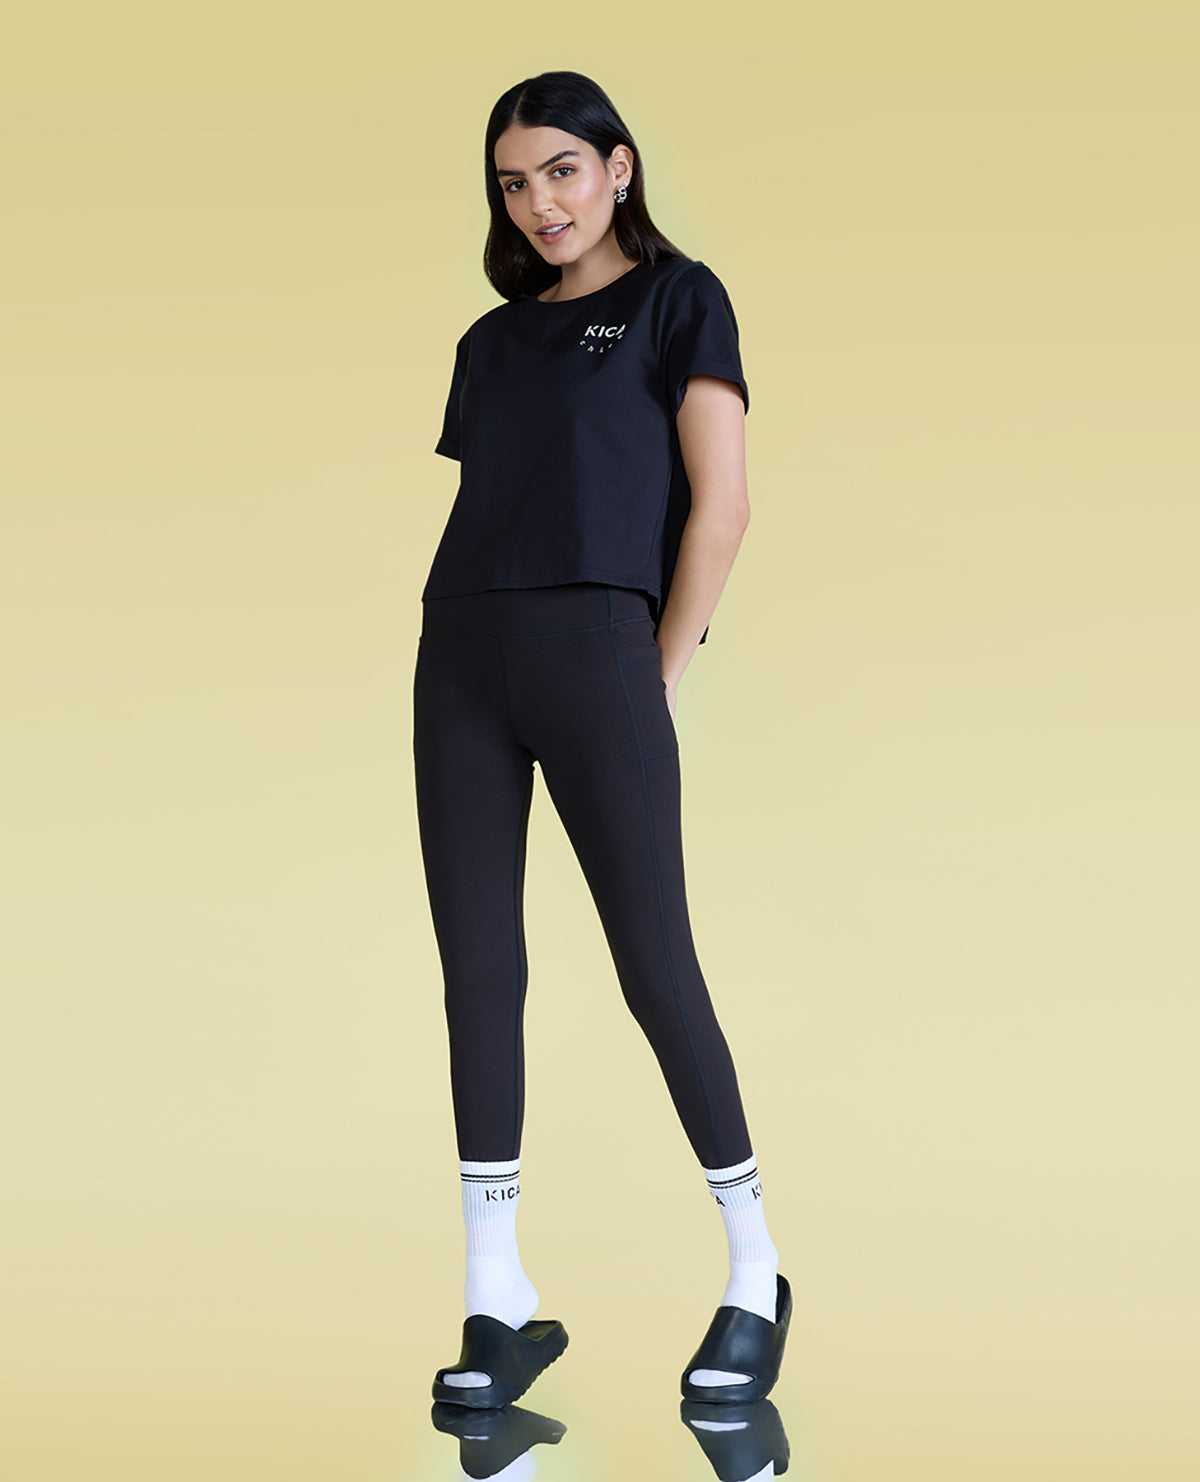 Co Ord Sets - Activewear for Women’s – Kica Active